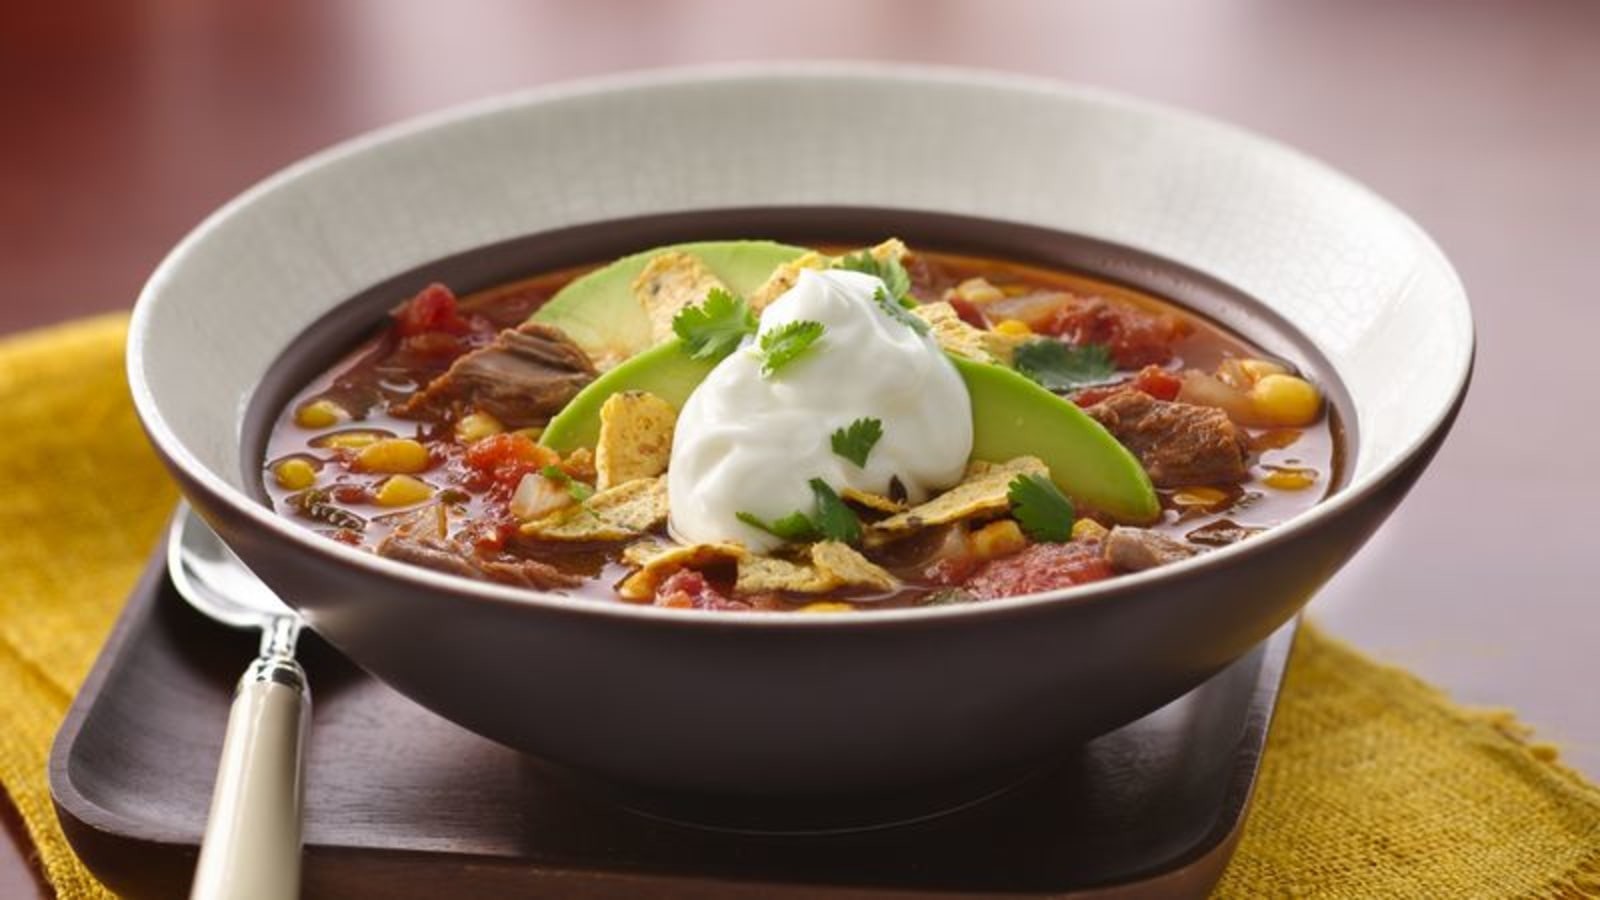 Image of Slow-Cooker Chipotle Beef Stew